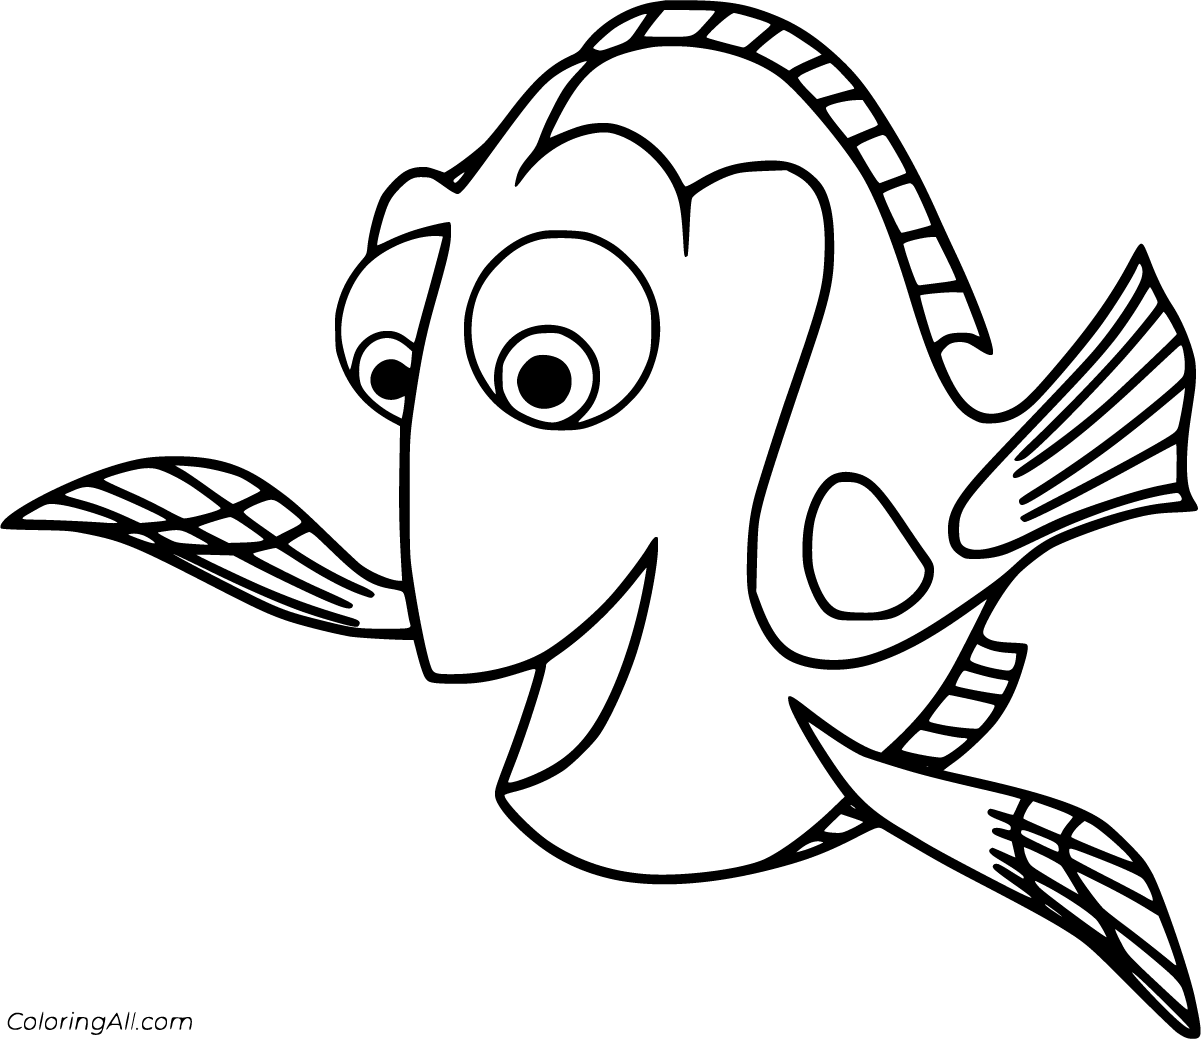 Finding Dory Coloring Pages (36 Free Printables) - ColoringAll